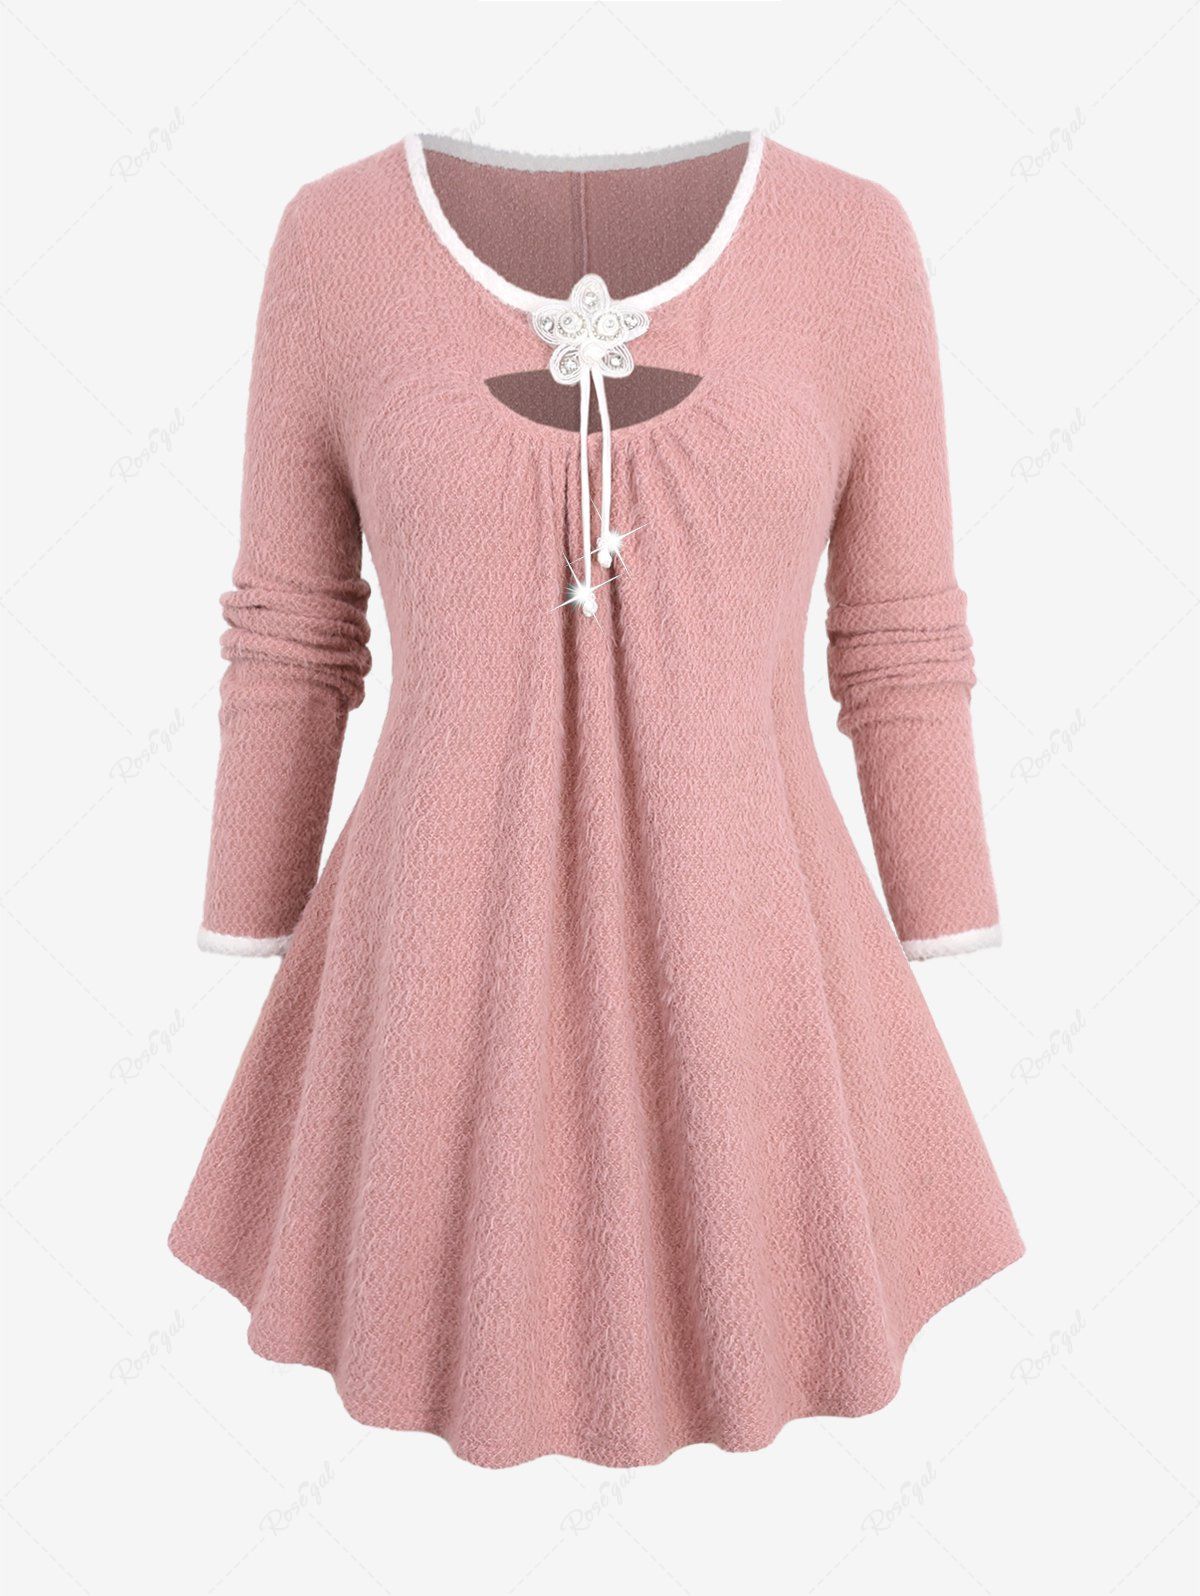 Chic Plus Size Sparkling Glitter Floral Buckle Cut Out Panel Contrast Binding Long Sleeves Fluffy Pullover Knit Sweater  